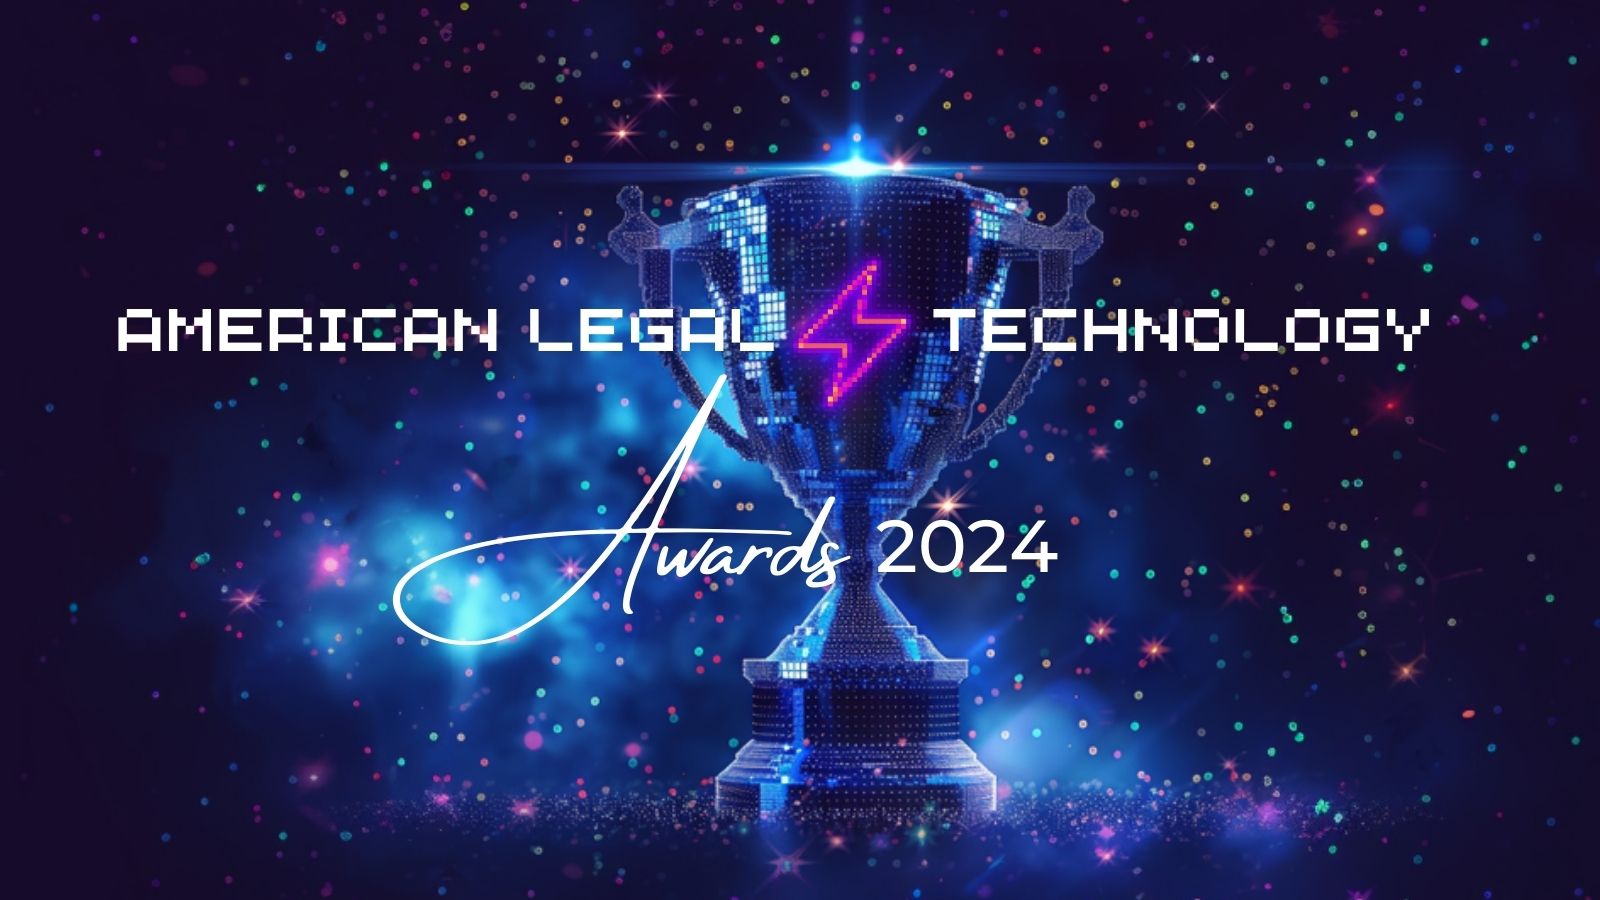 Nominations Open for 2024 American Legal Technology Awards, to be Presented at Gala Dinner in October